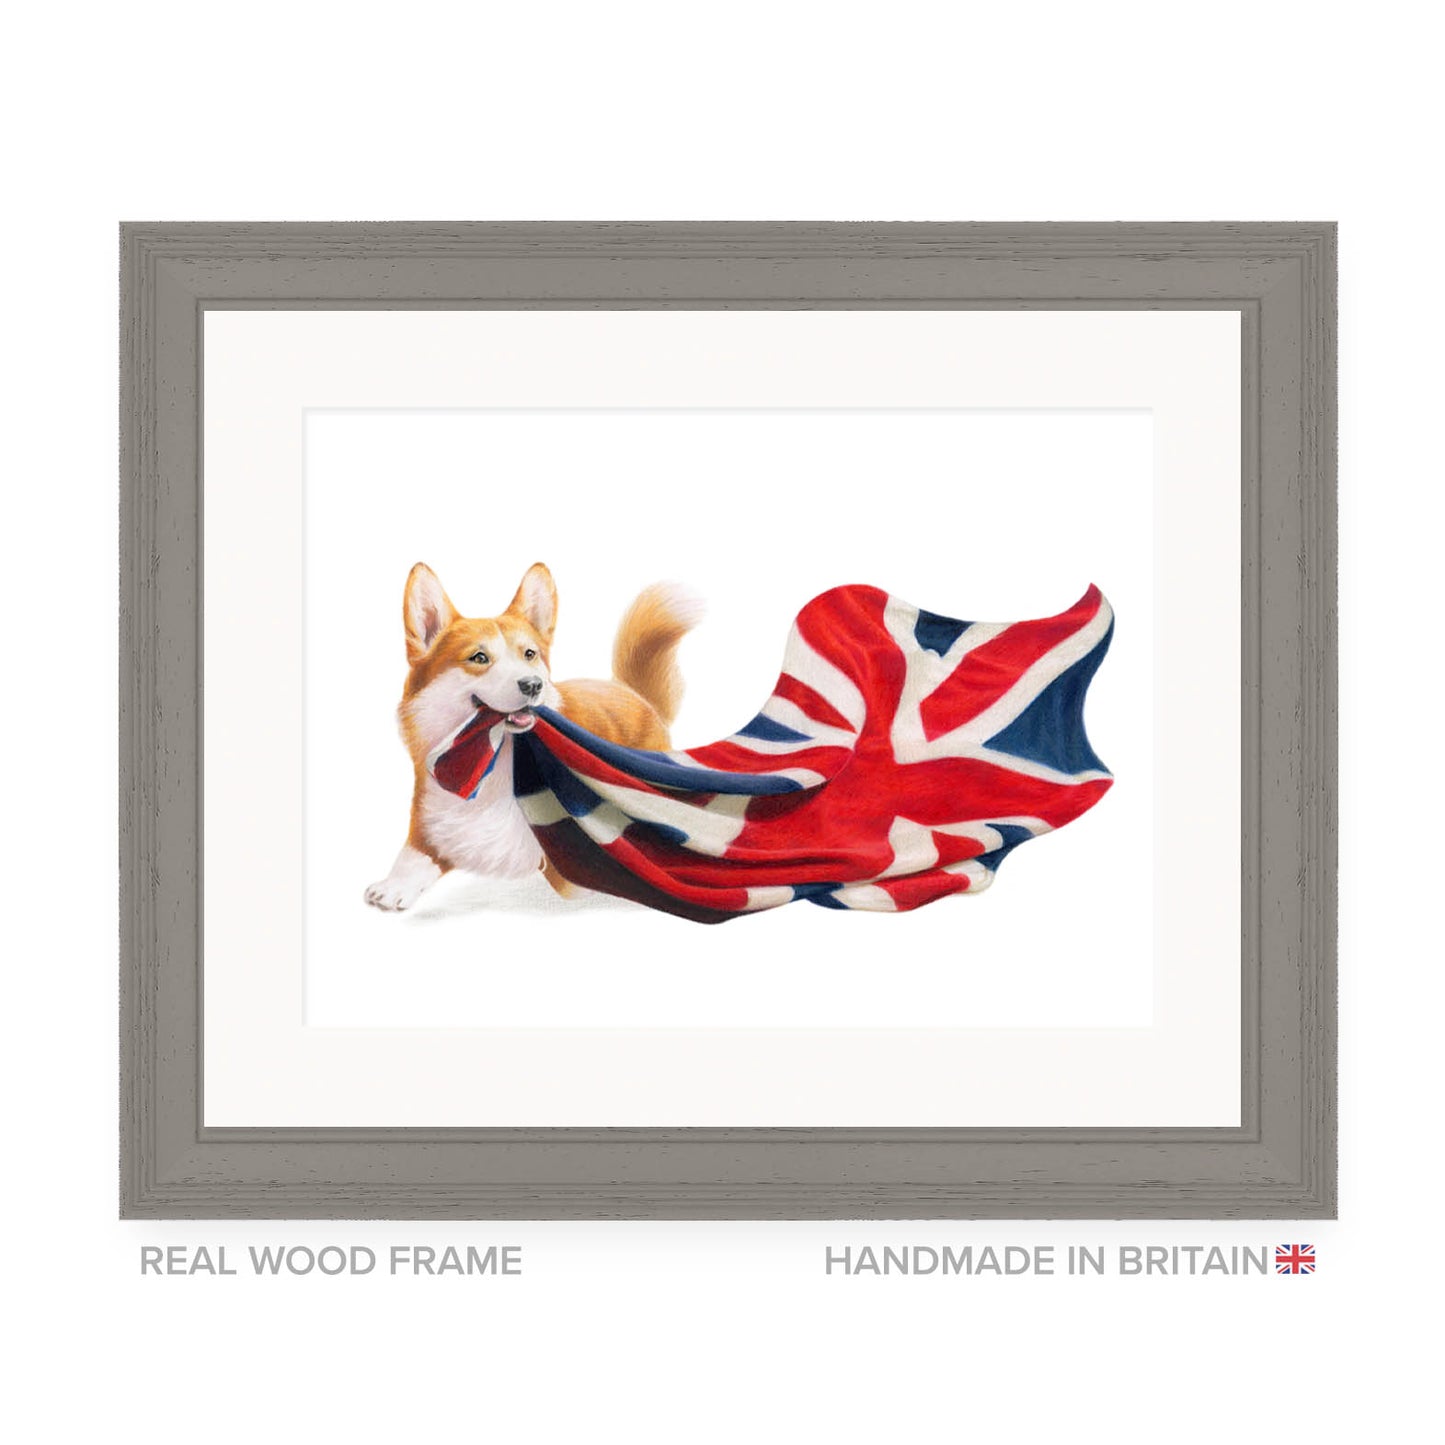 Her Majesty’s Flag Bearer - Collector’s Edition Print